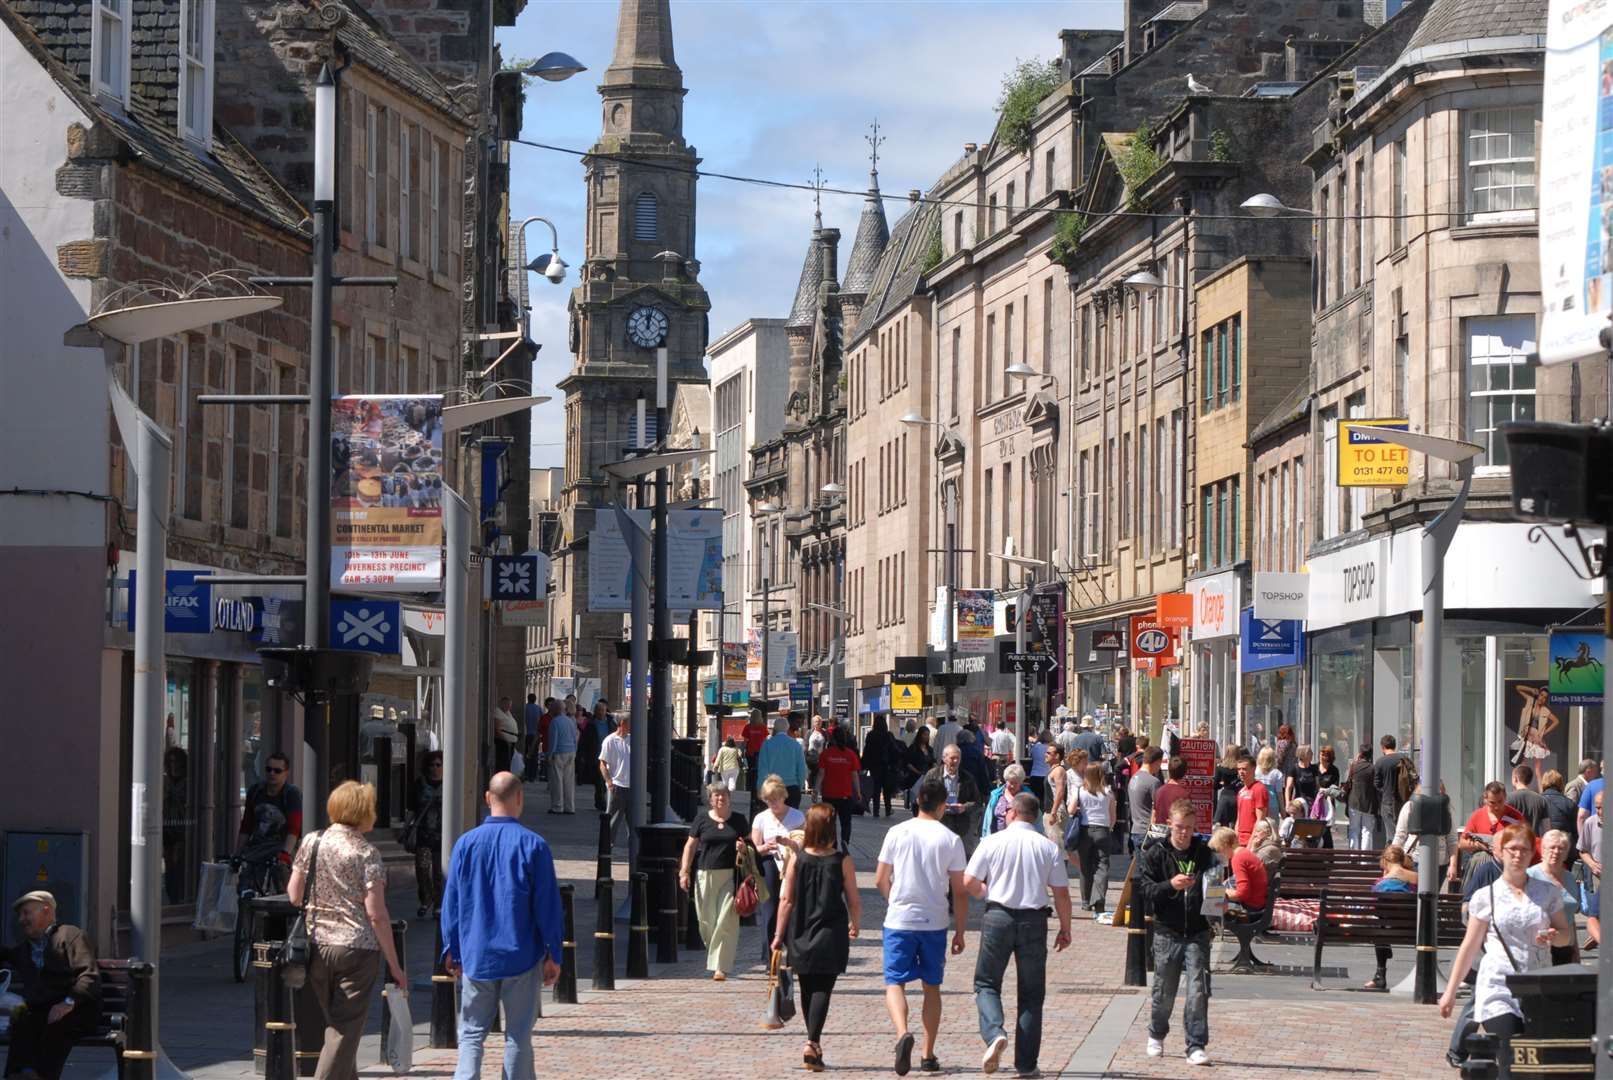 Scenes like this on Inverness High Street will again be possible as the country gets back to business.